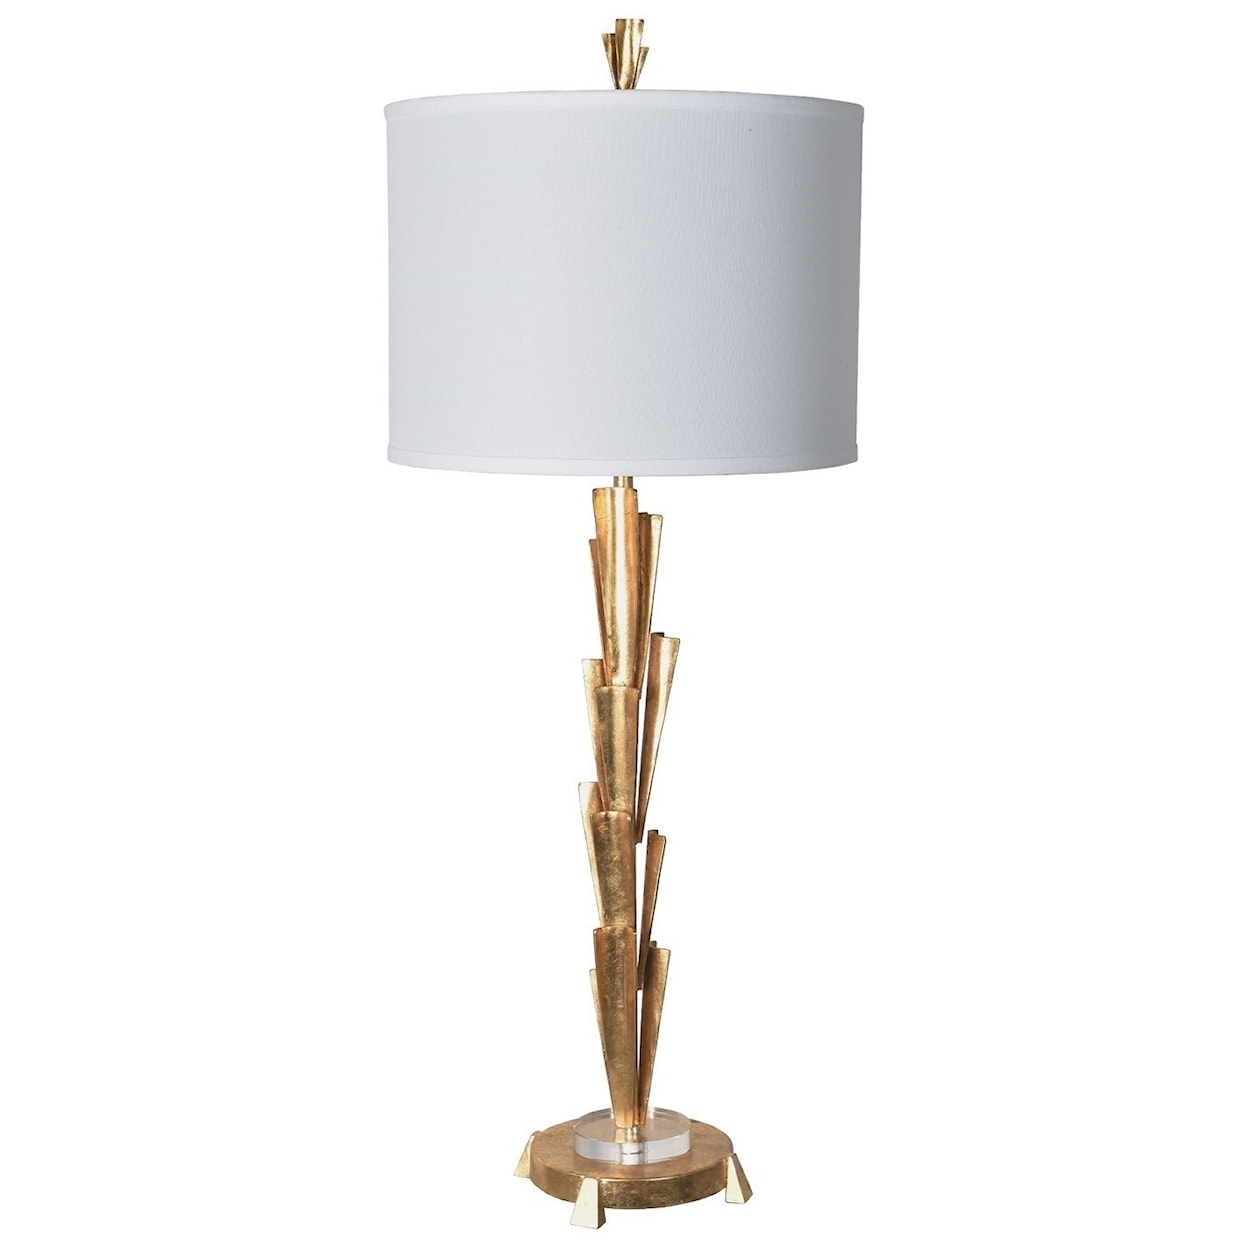 Crestview Collection Lighting Lawrence Table Lamp